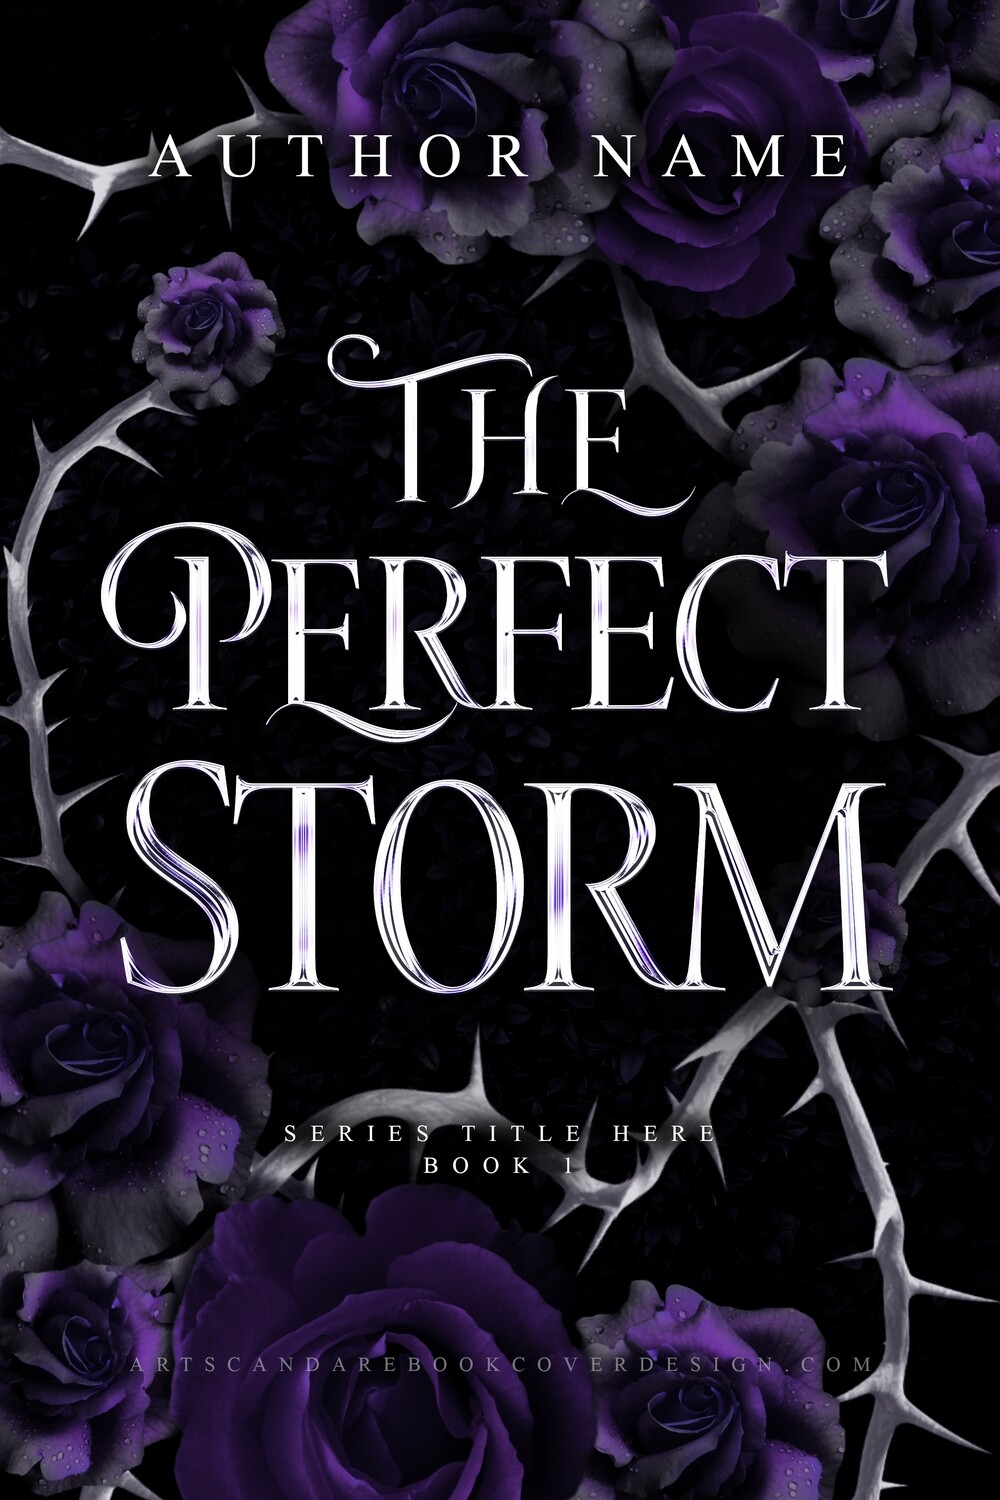 THE PERFECT STORM